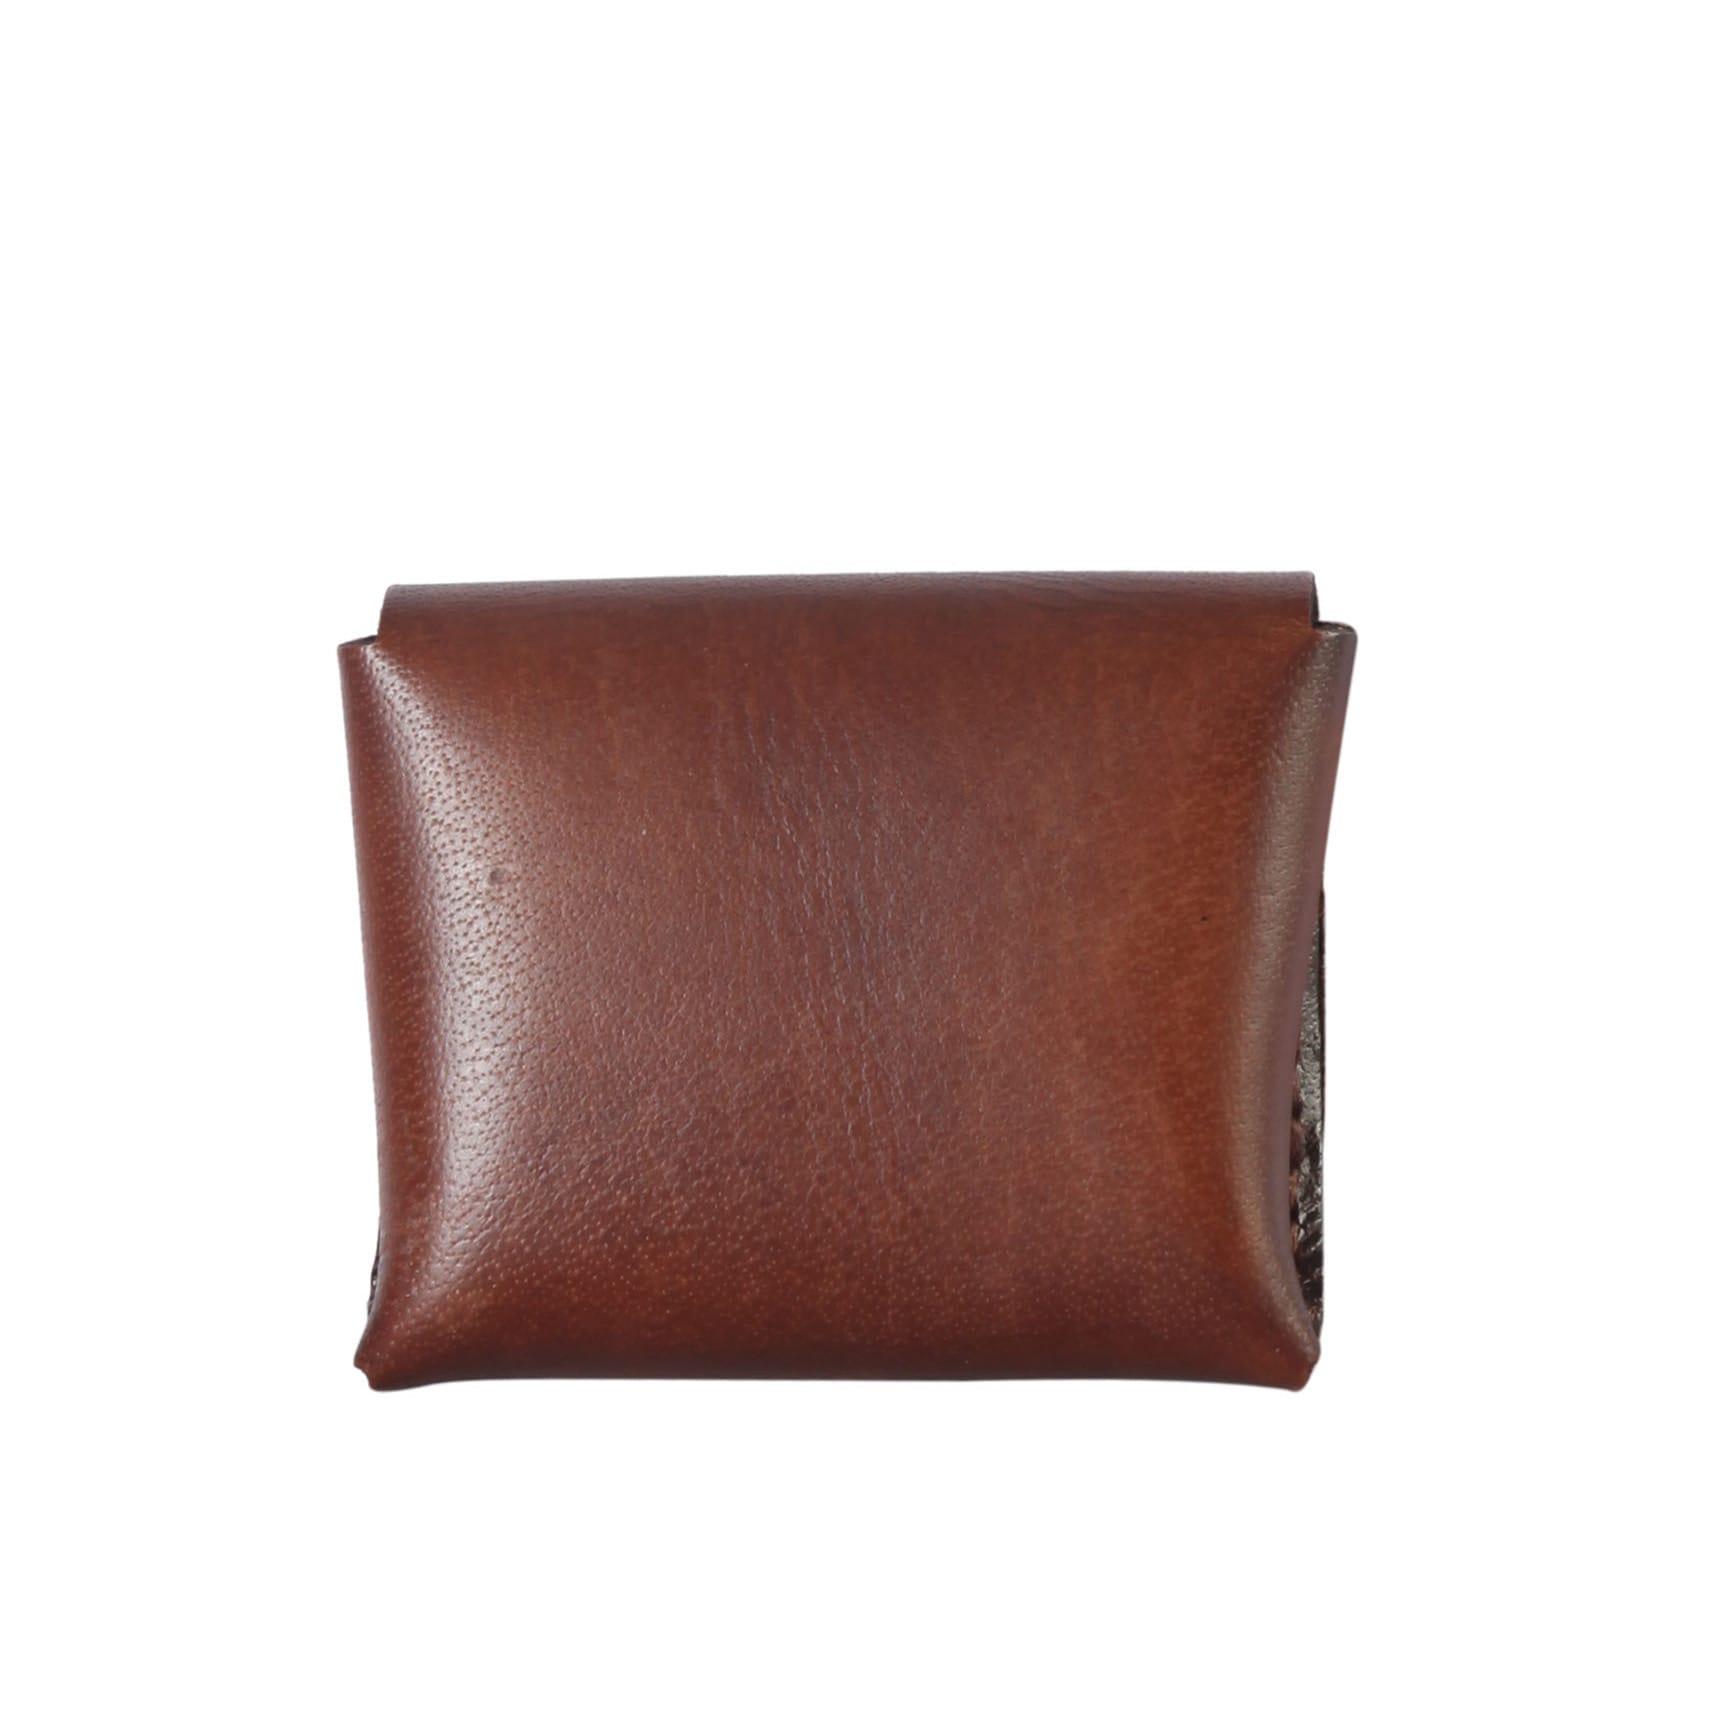 small leather coin pouch